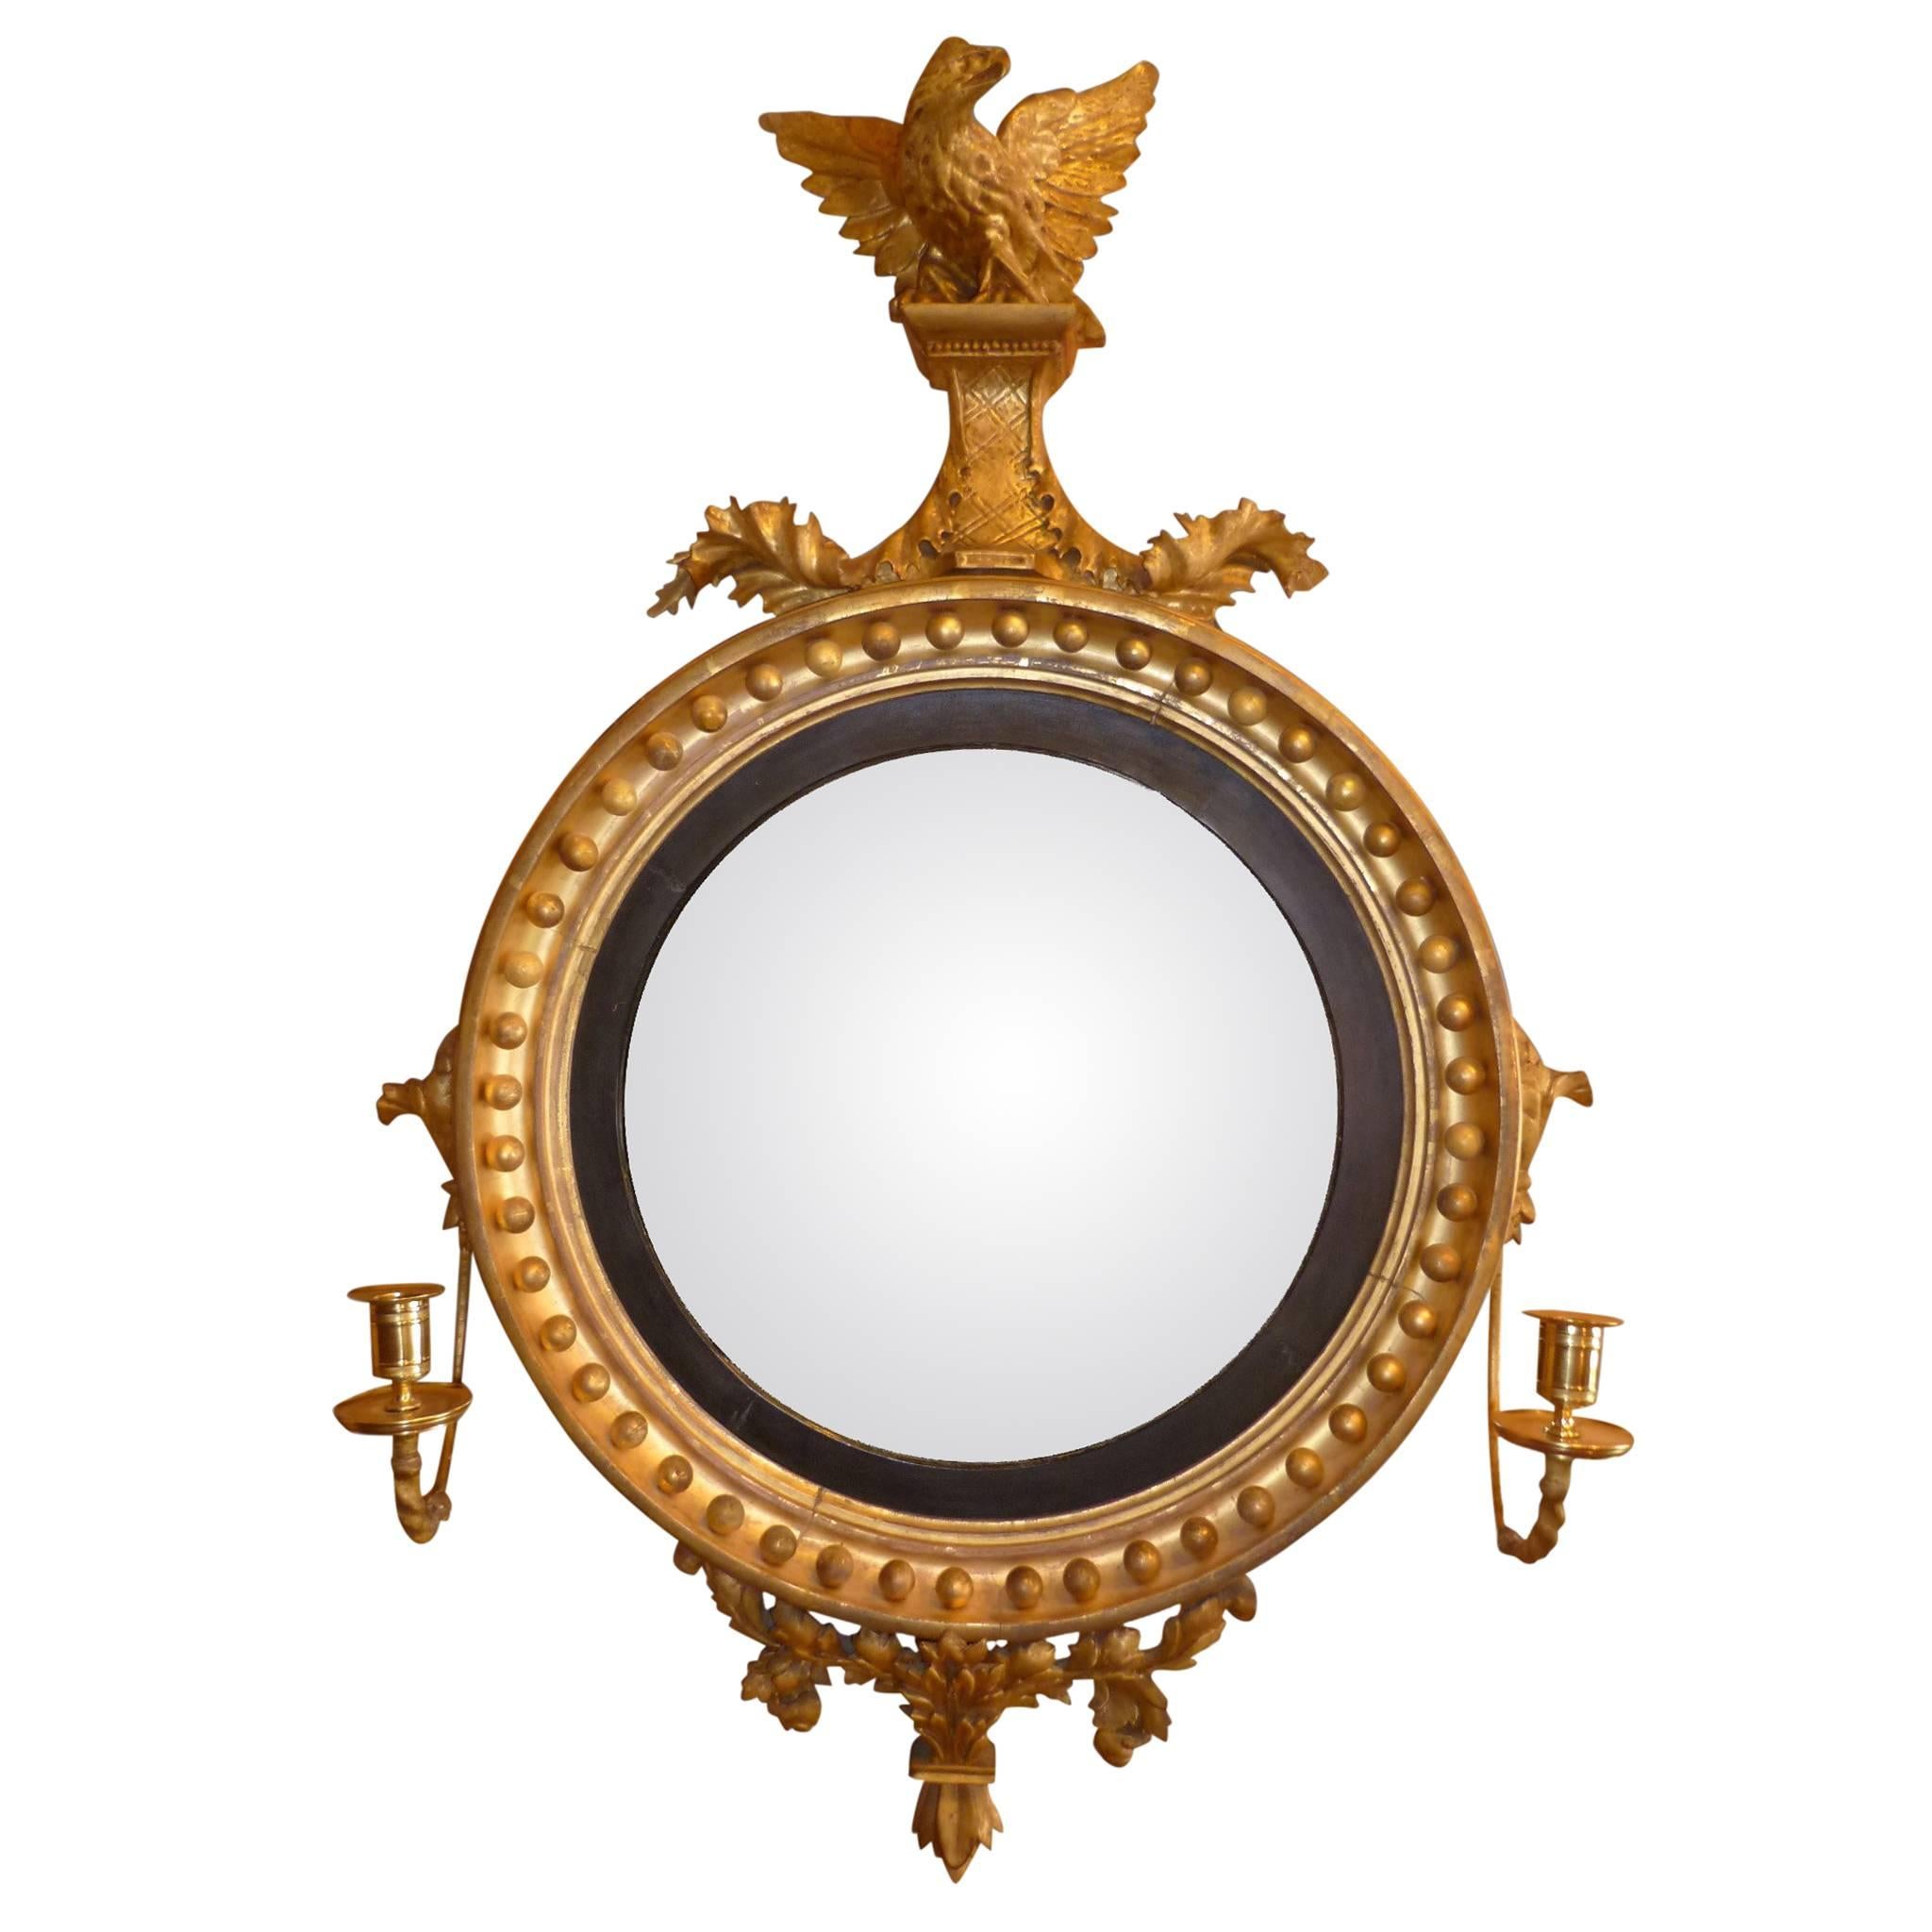 Regency Convex Miror with Eagle Sumount and Candle Sconces For Sale